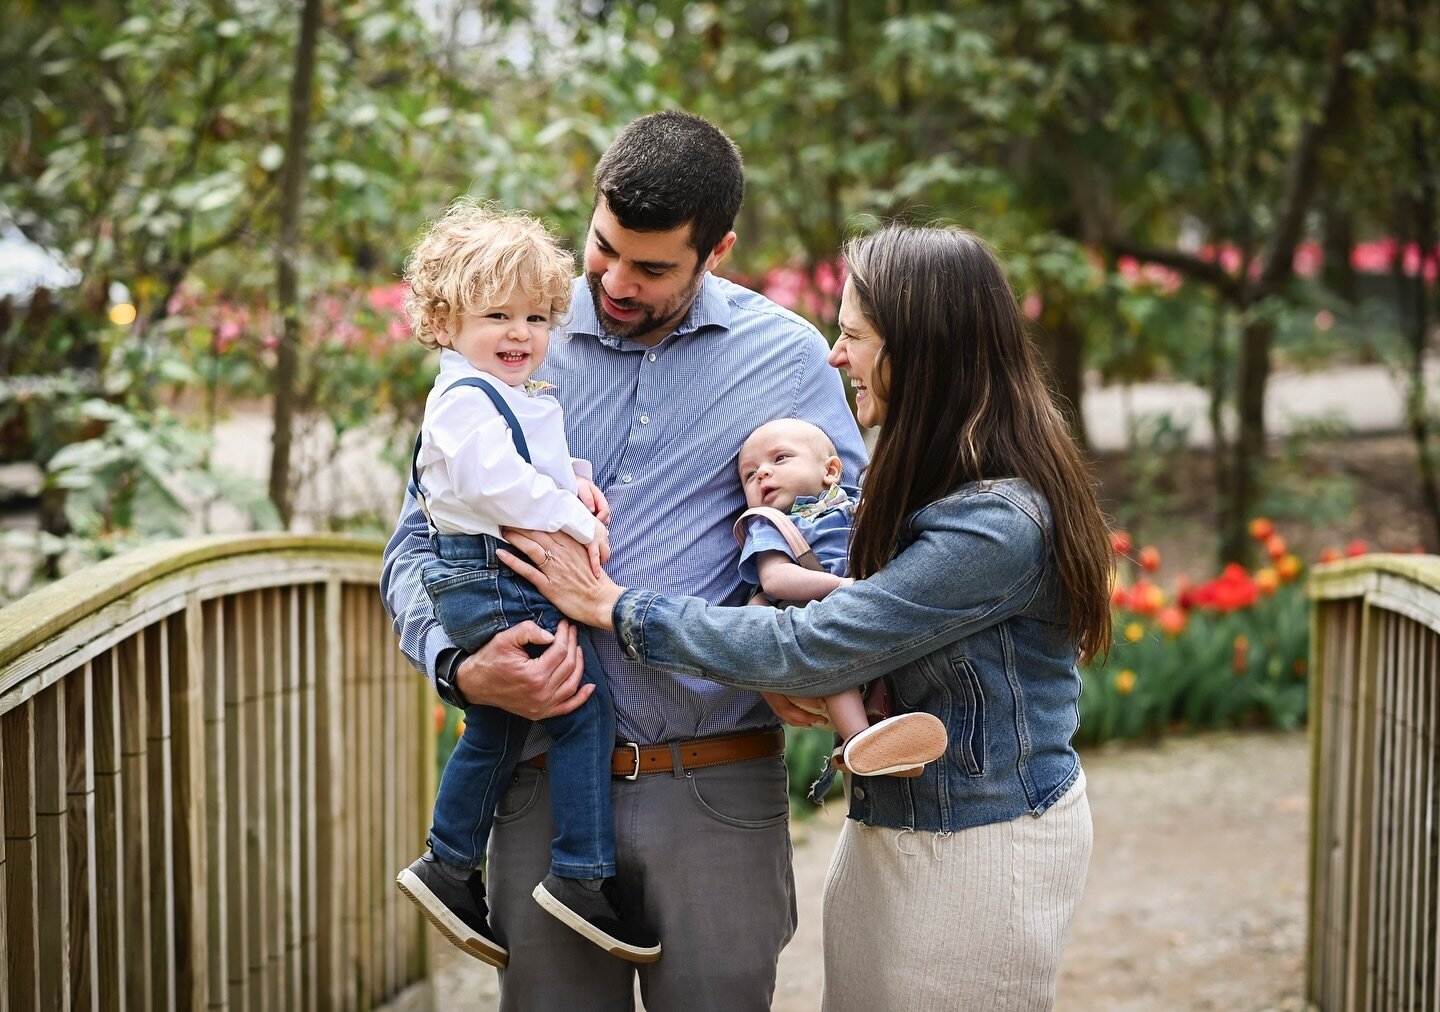 The sweetest spring family session!